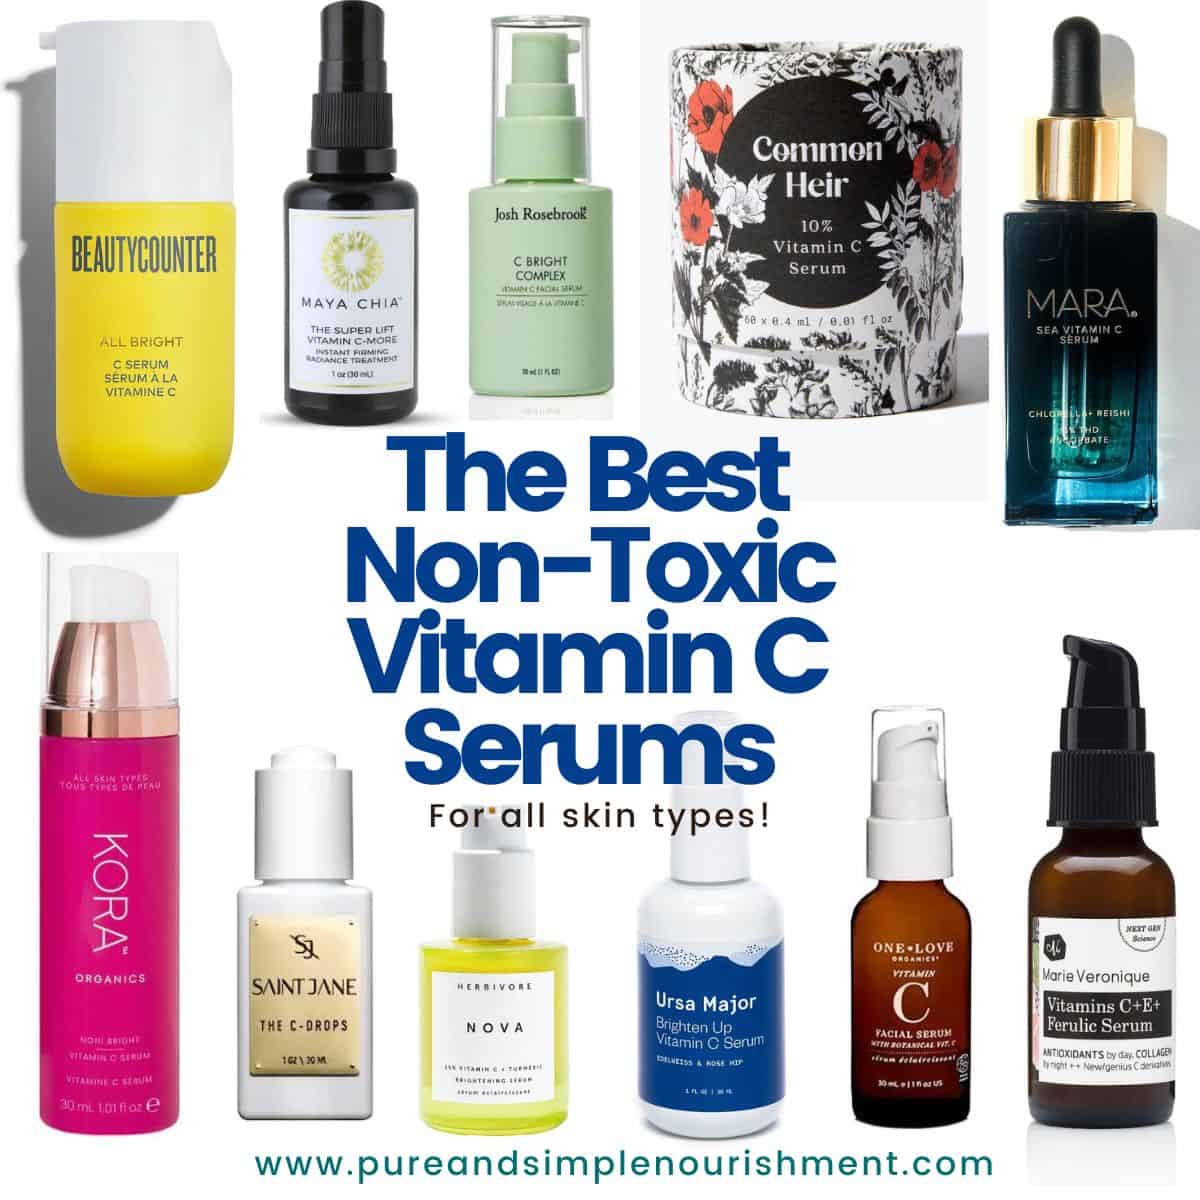 A collage of vitamin C serums with the title The Best Non-Toxic Vitamin C Serums over them.